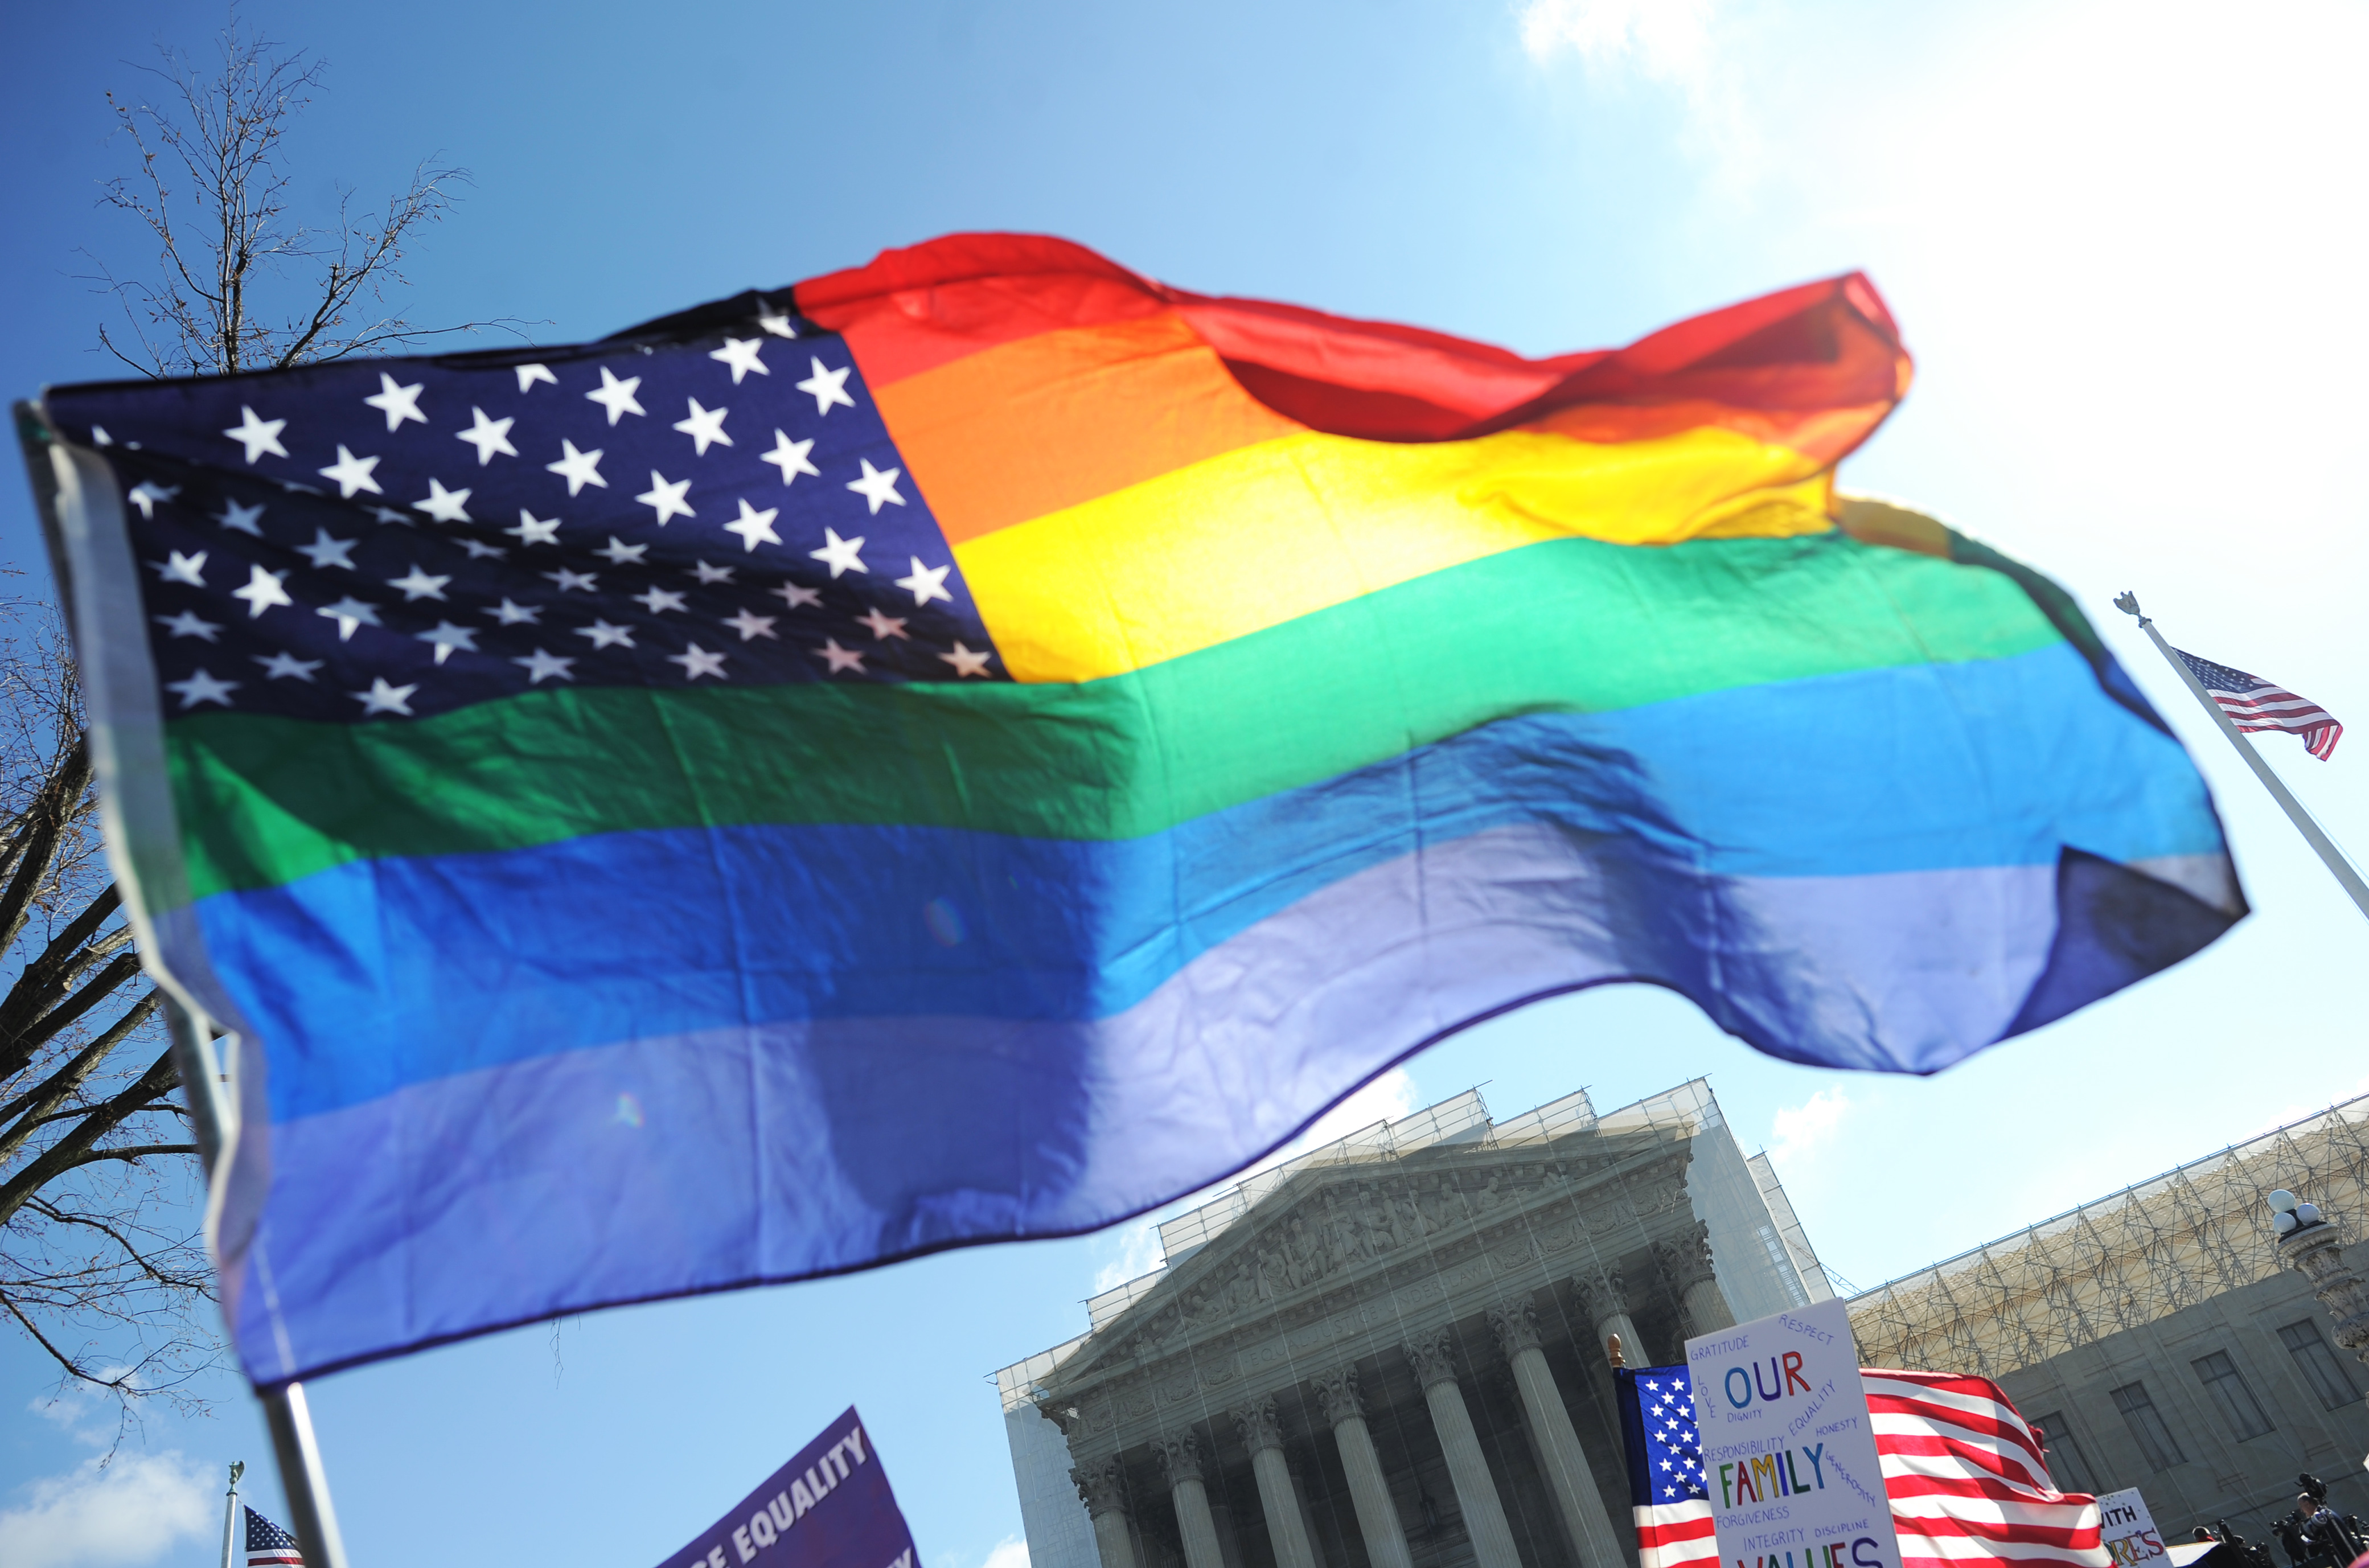 Same-sex marriage supporters wave a rainbow flag in front of the US Supreme Court on March 26, 2013 in Washington. (Jewel Samad—AFP/Getty Images)